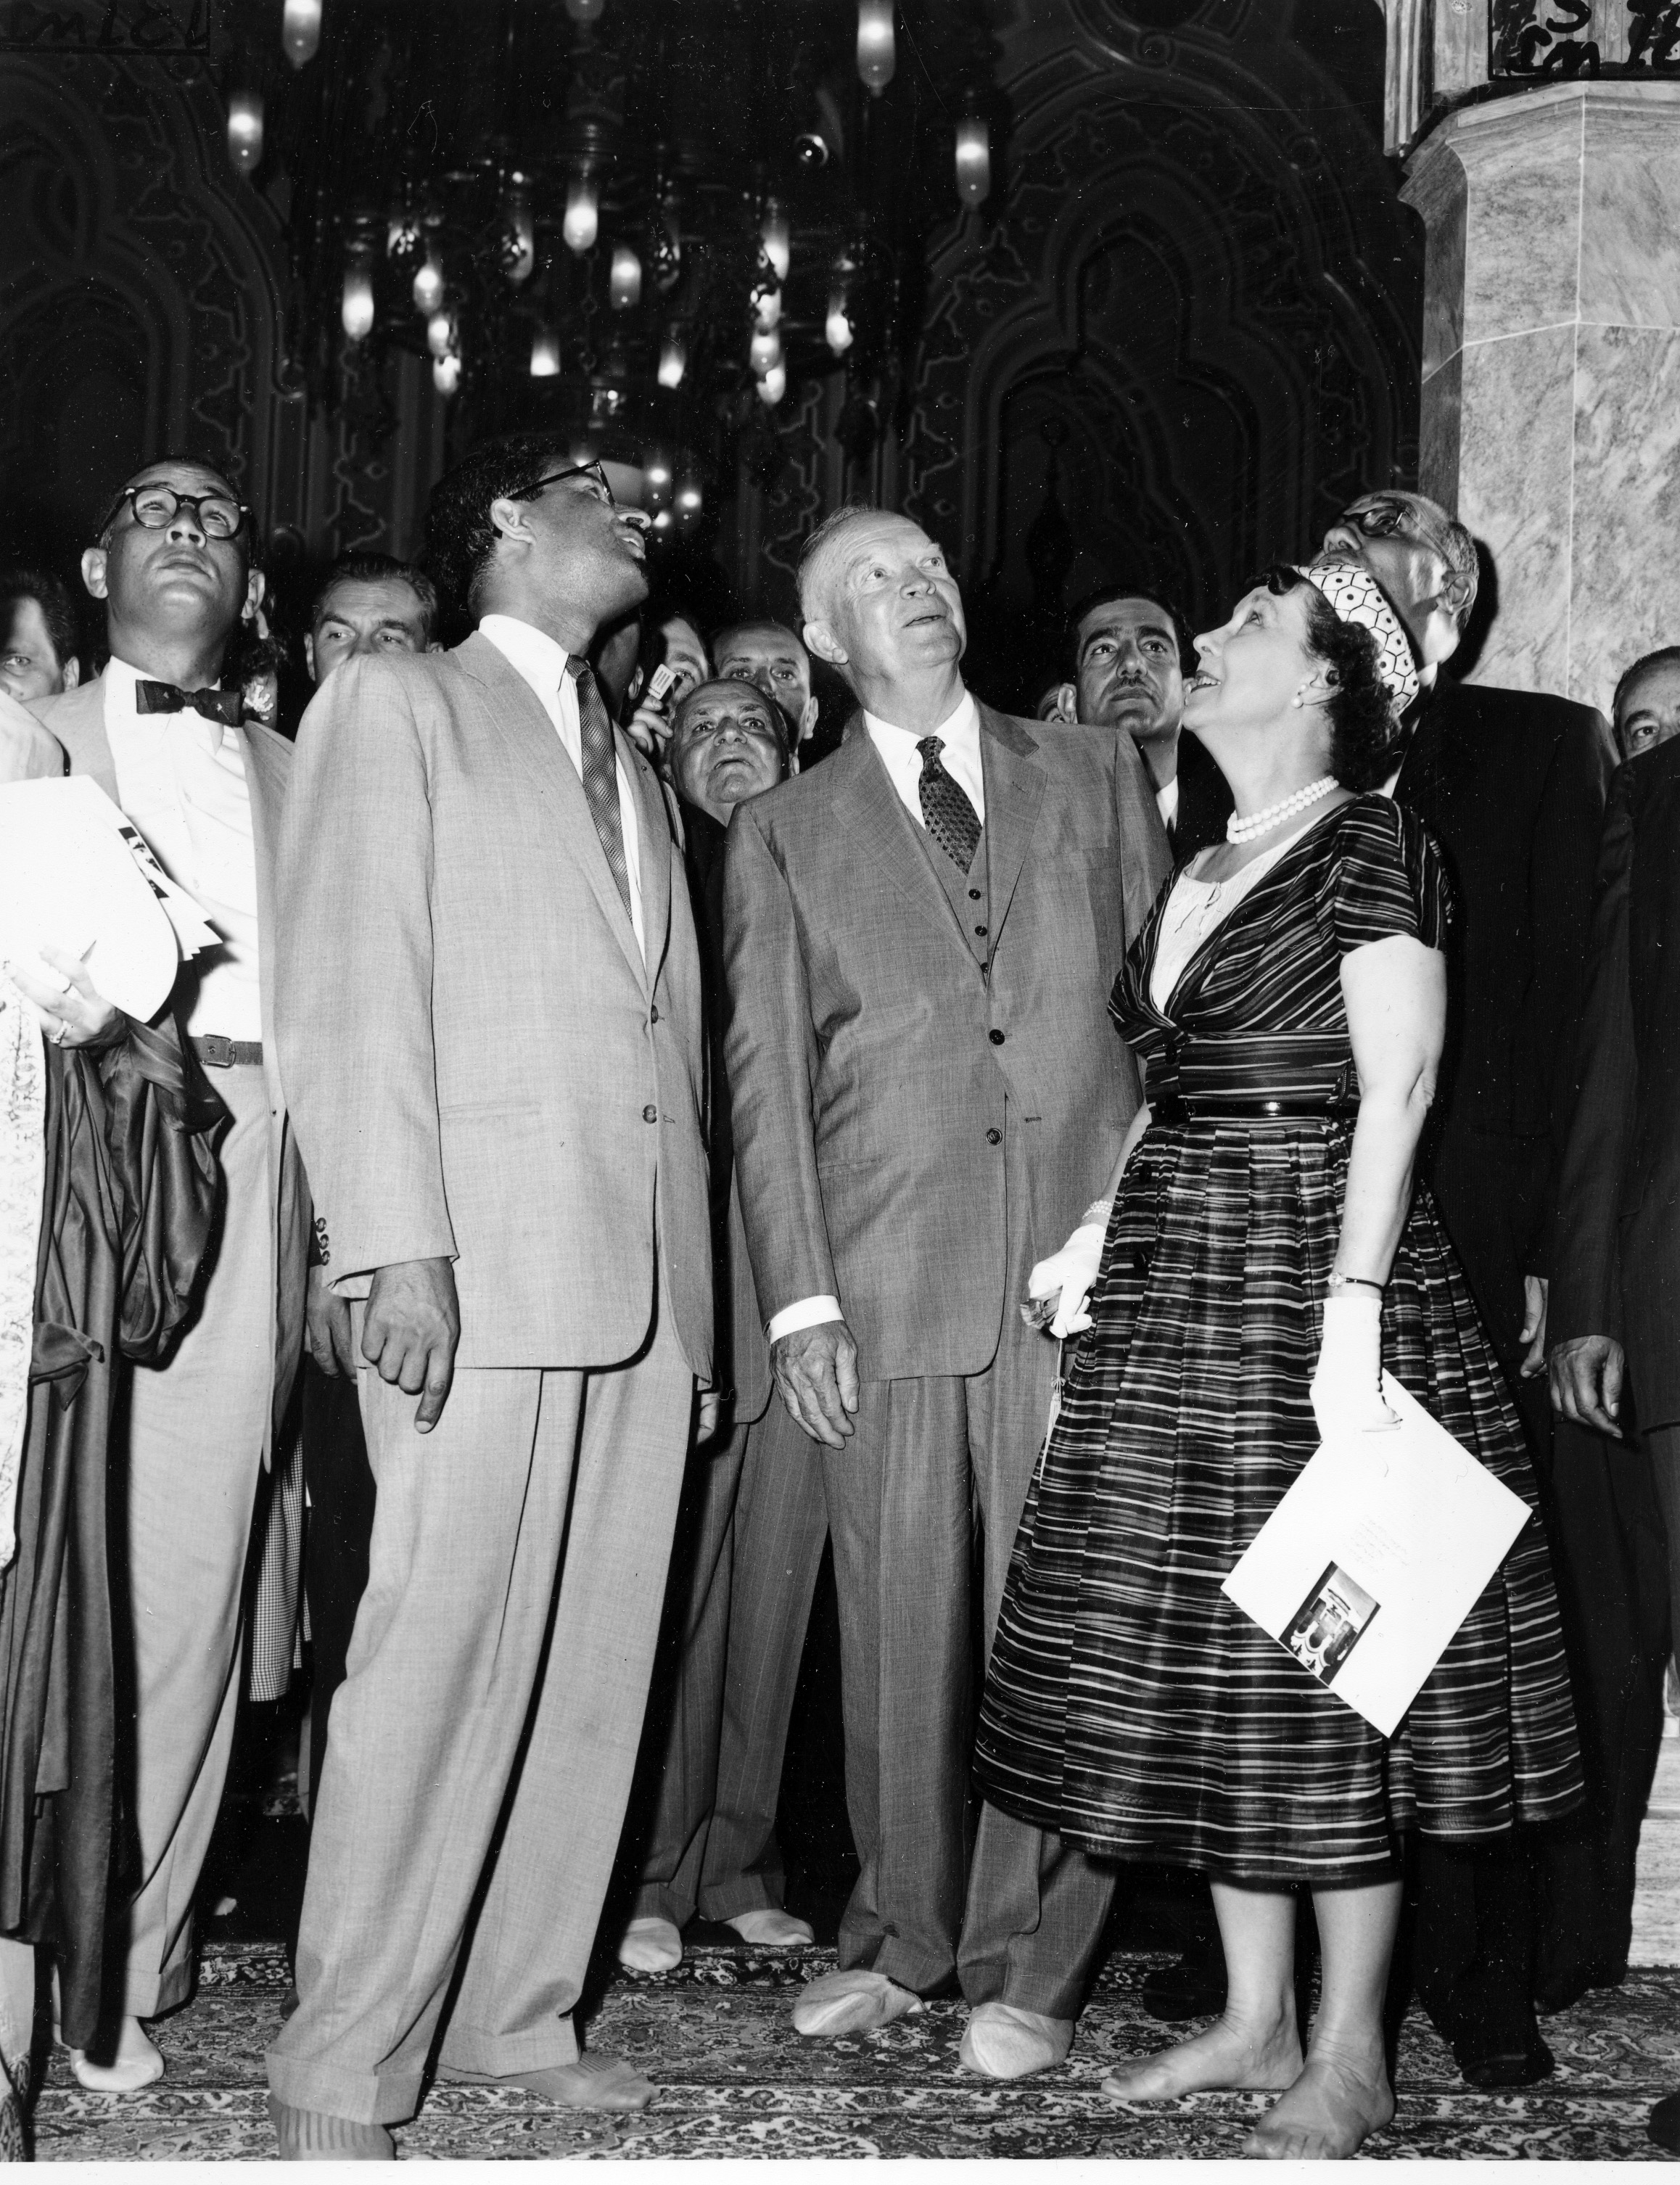 First lady Mamie Doud Eisenhower and U.S. President Dwight D. Eisenhower stand shoeless as they admire the architectural details pointed out by Sheikh Abdullah Al-Khayyal, Saudi Arabian ambassador, at the dedication ceremony of the Islamic Center and Mosque, in Washington, on June 28, 1957. (AP)